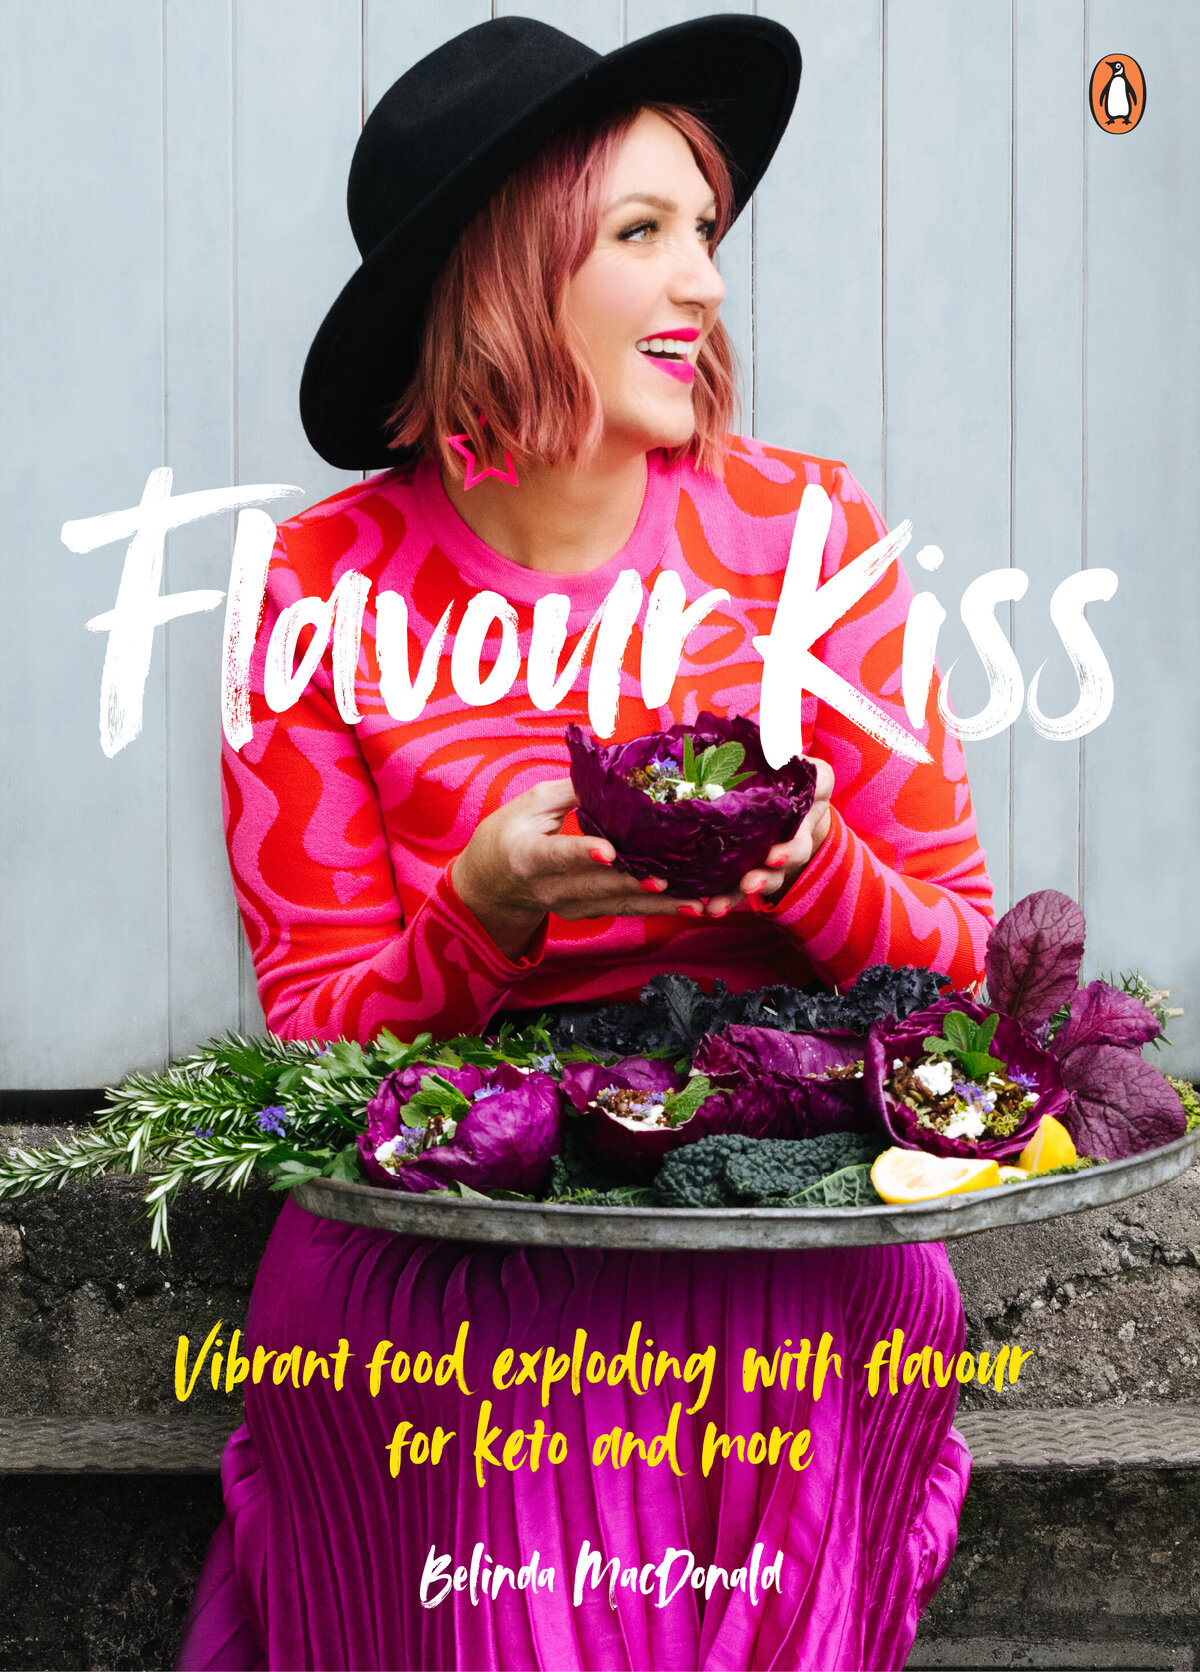 A Kiwi food personality who lives and breathes her passion for vibrant, fun  and flavourful food!